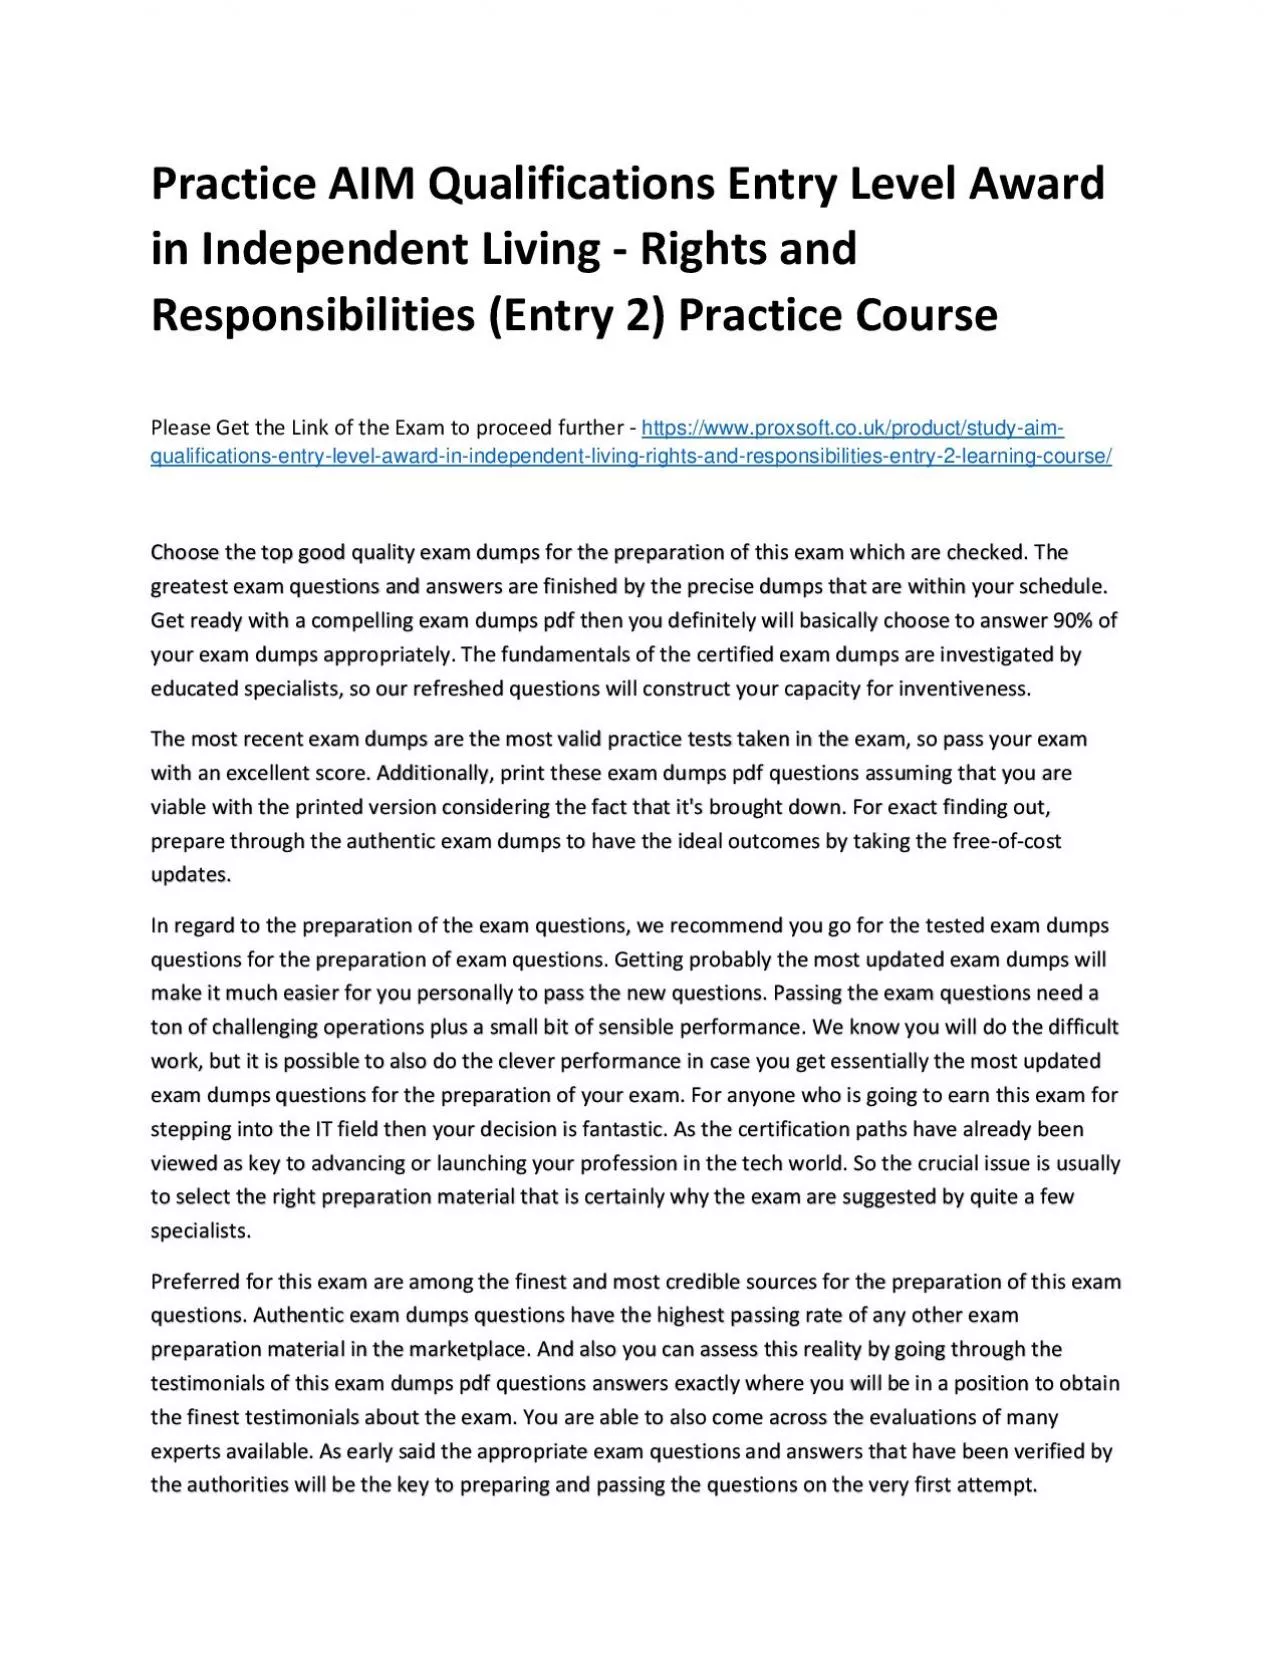 Practice AIM Qualifications Entry Level Award in Independent Living - Rights and Responsibilities